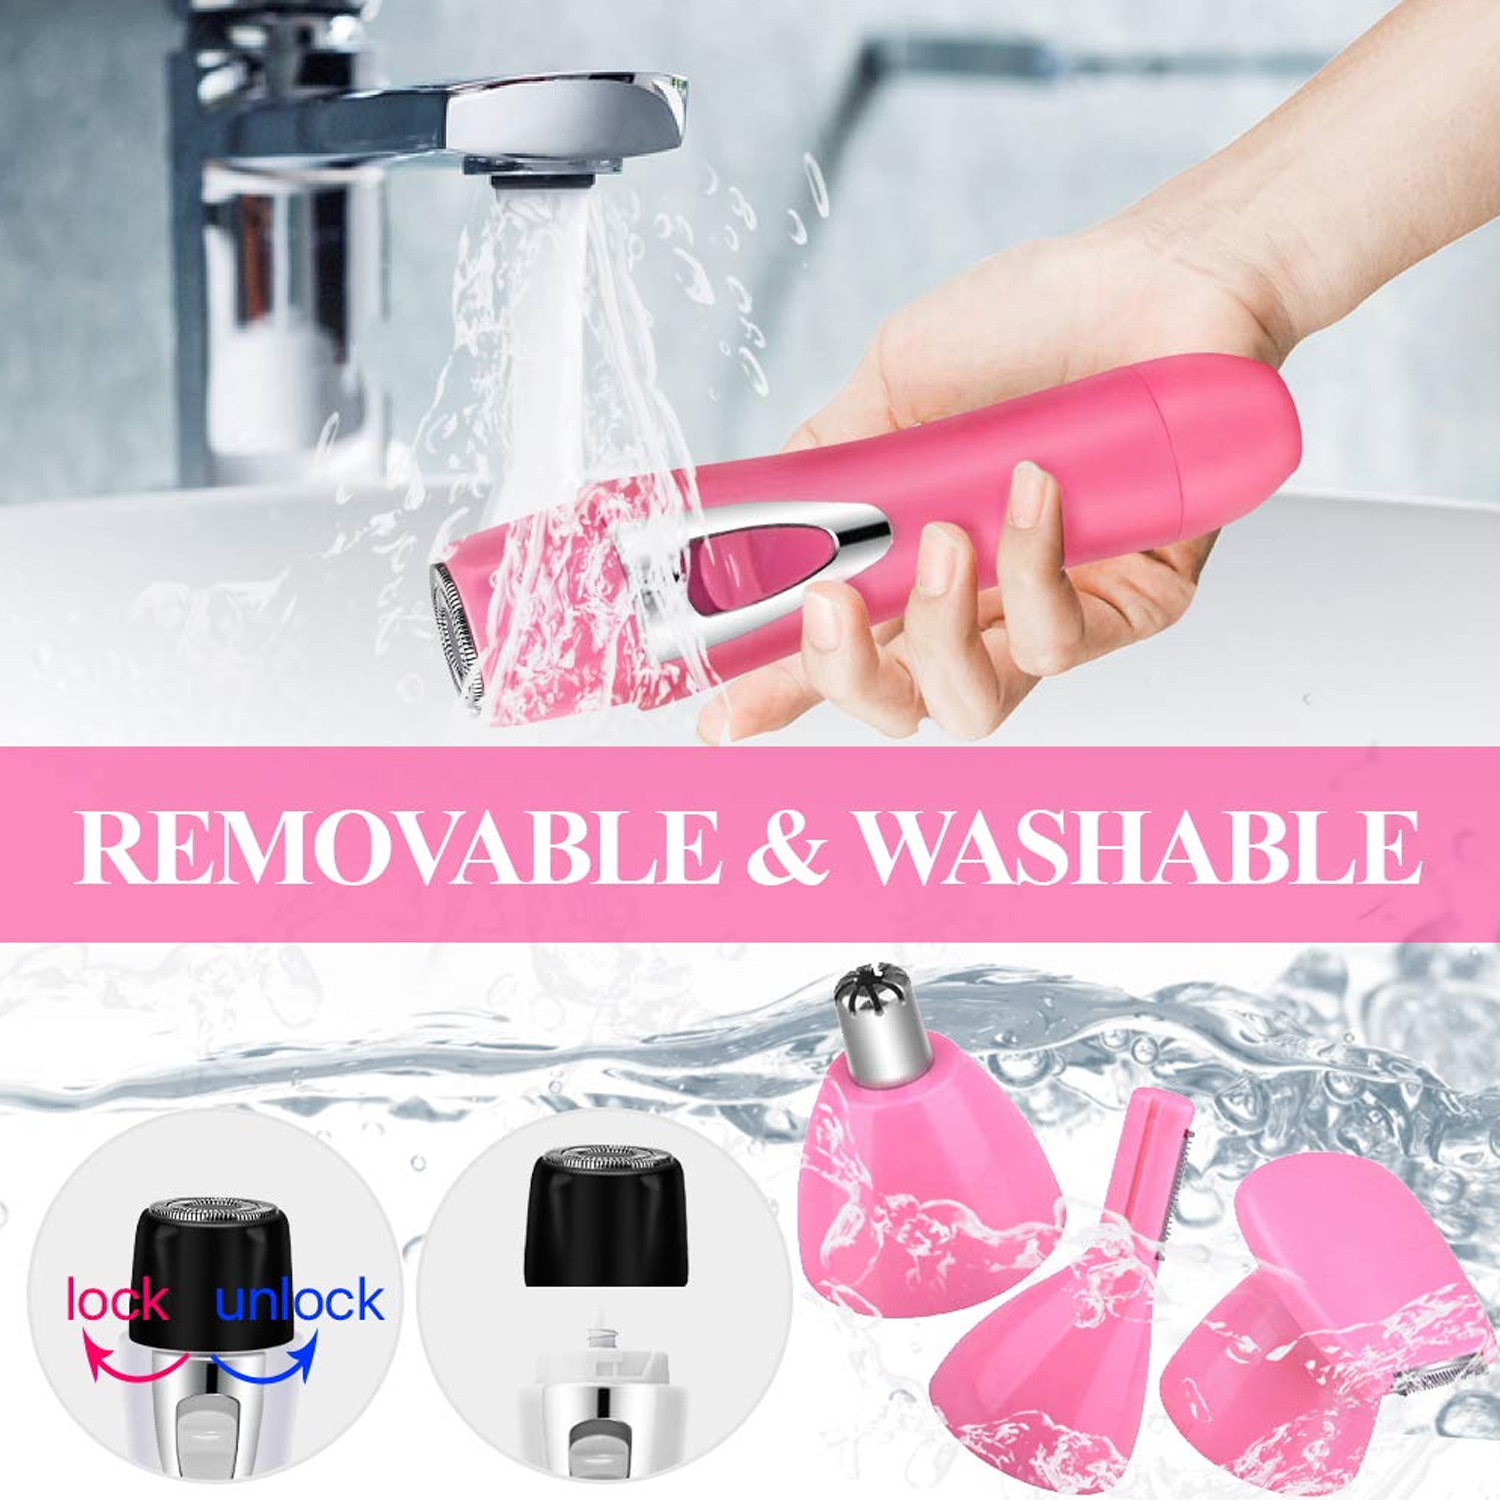 4 in 1 Waterproof And Painless Facial Hair Removal For Women